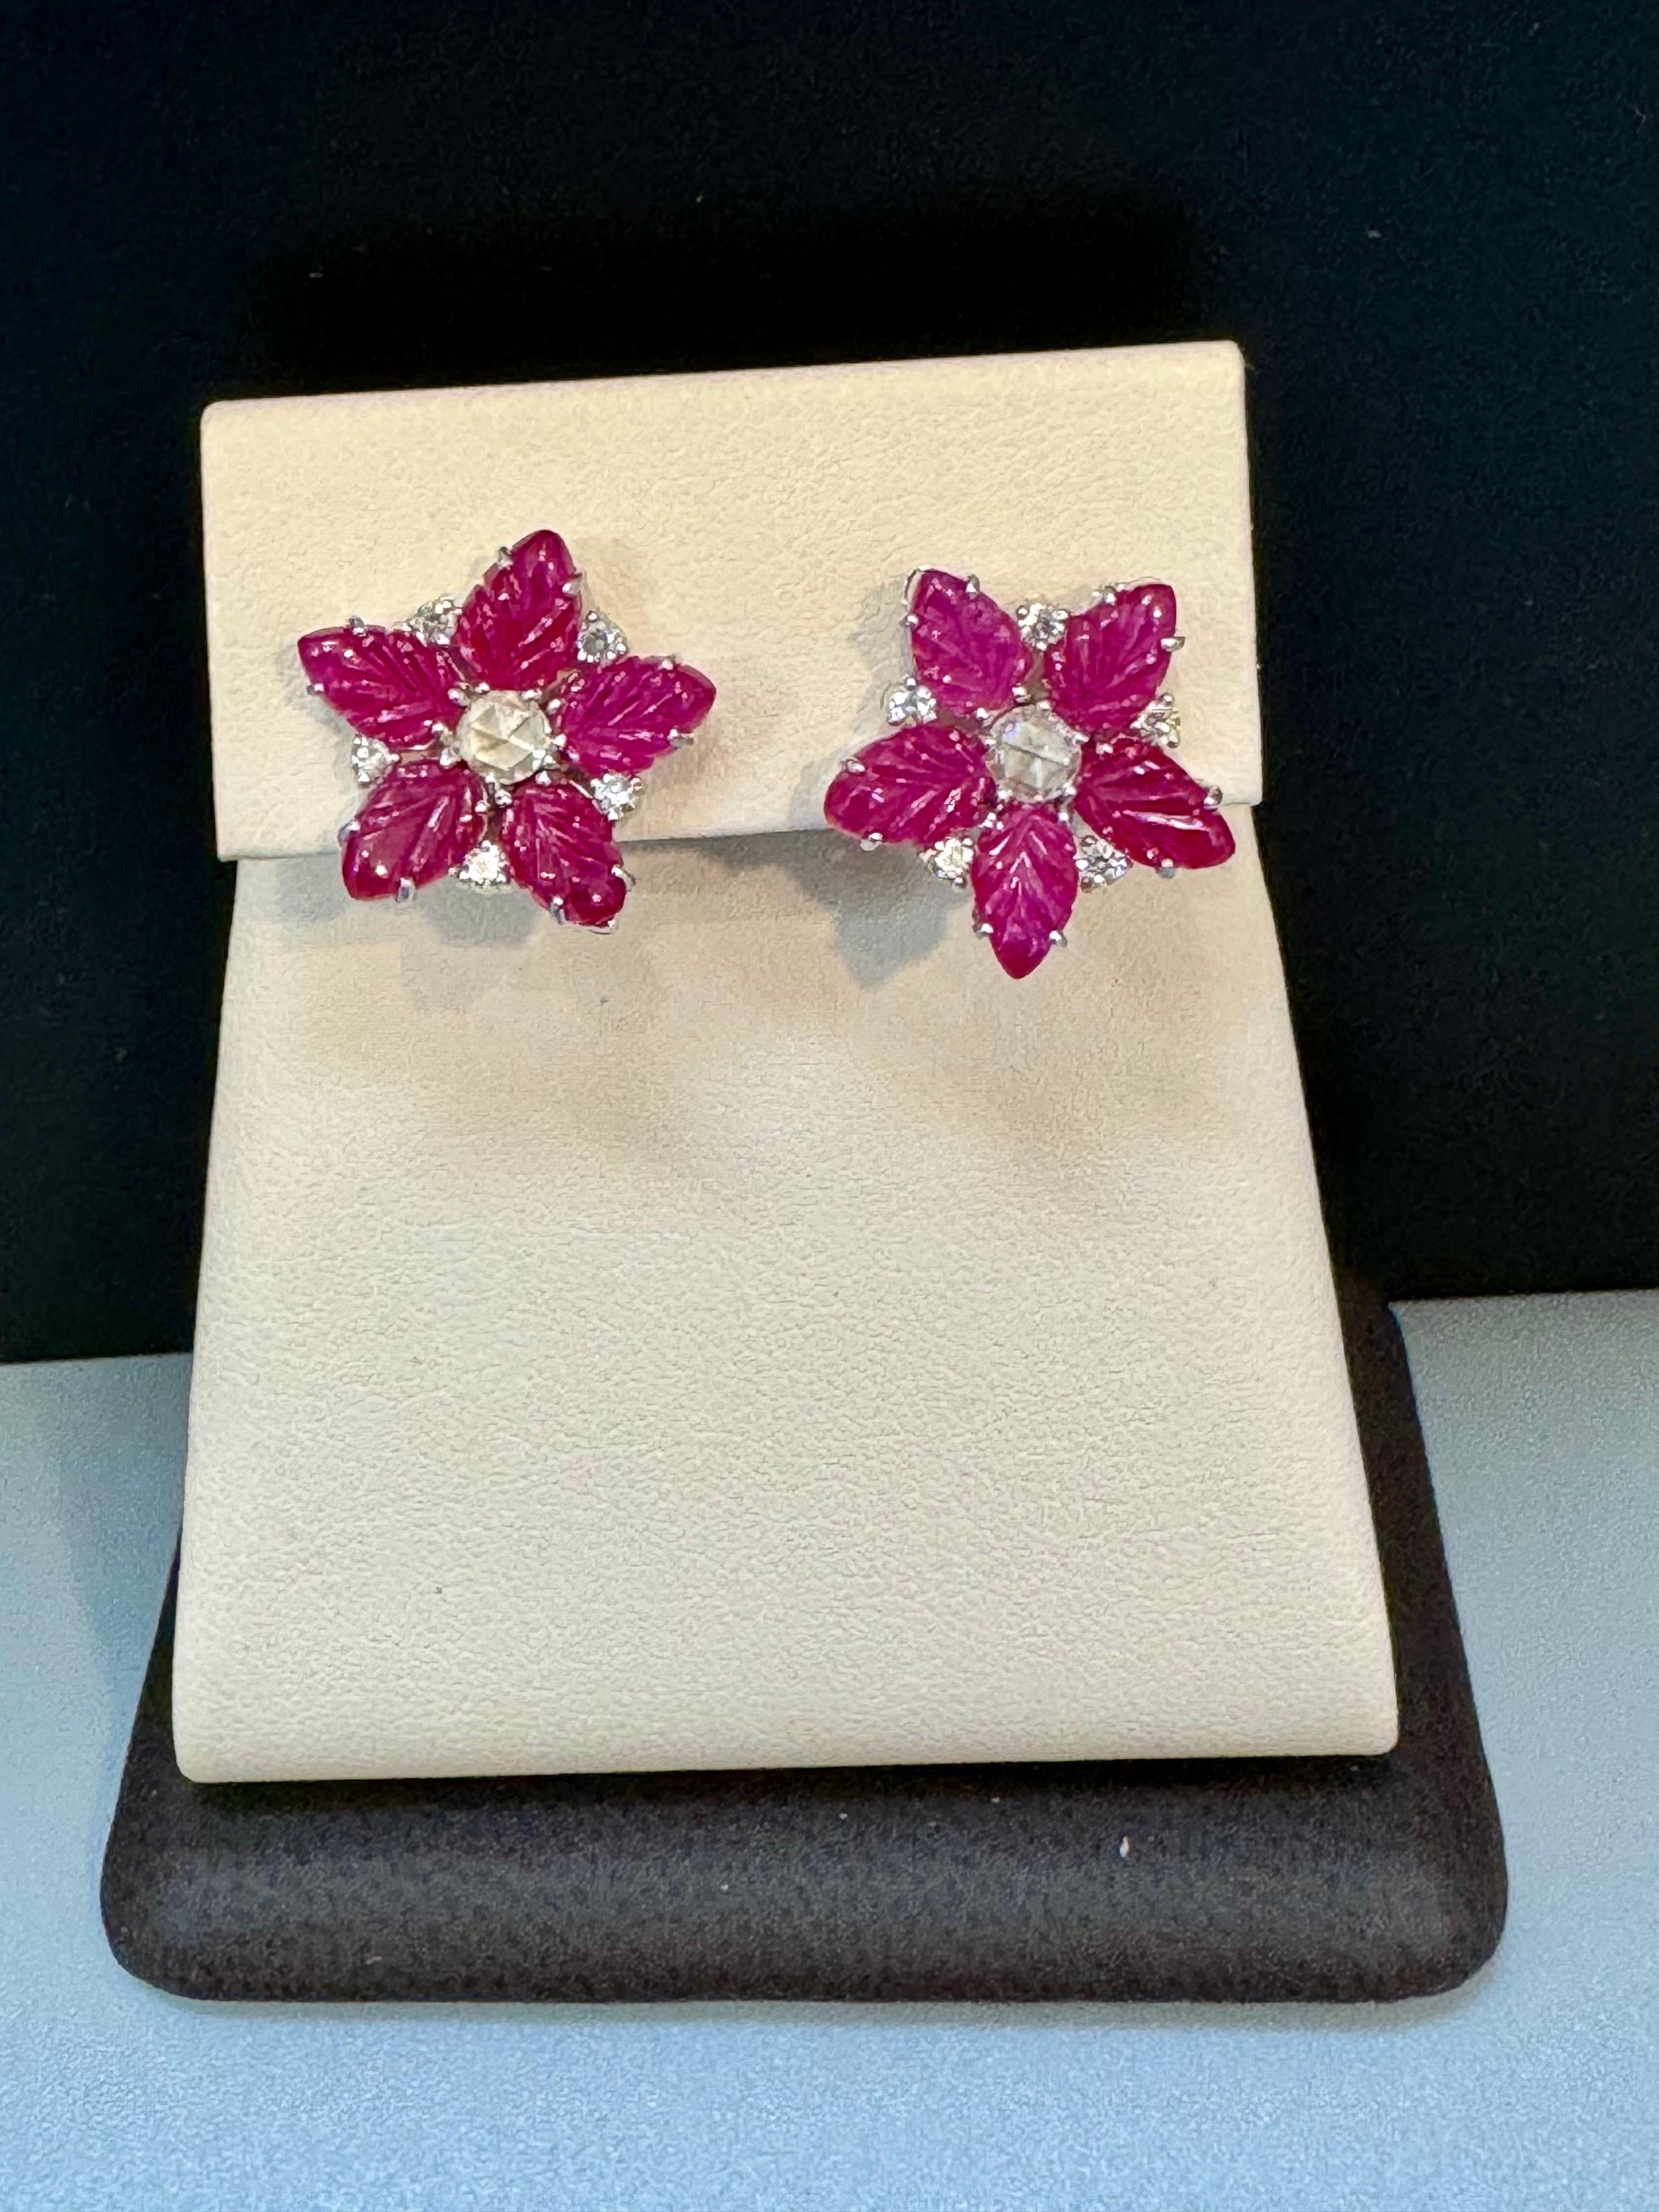 Tutti Frutti Earrings Natural  Ruby  Carved Leaves & Diamond Earrings in  18 KWG
Tutti Frutti Earrings/ Natural   Ruby  Earrings/ Carving Leaf 18 Karat white Gold.
Discover elegance in our carved Ruby Leaves with  Diamond Post Earrings crafted with